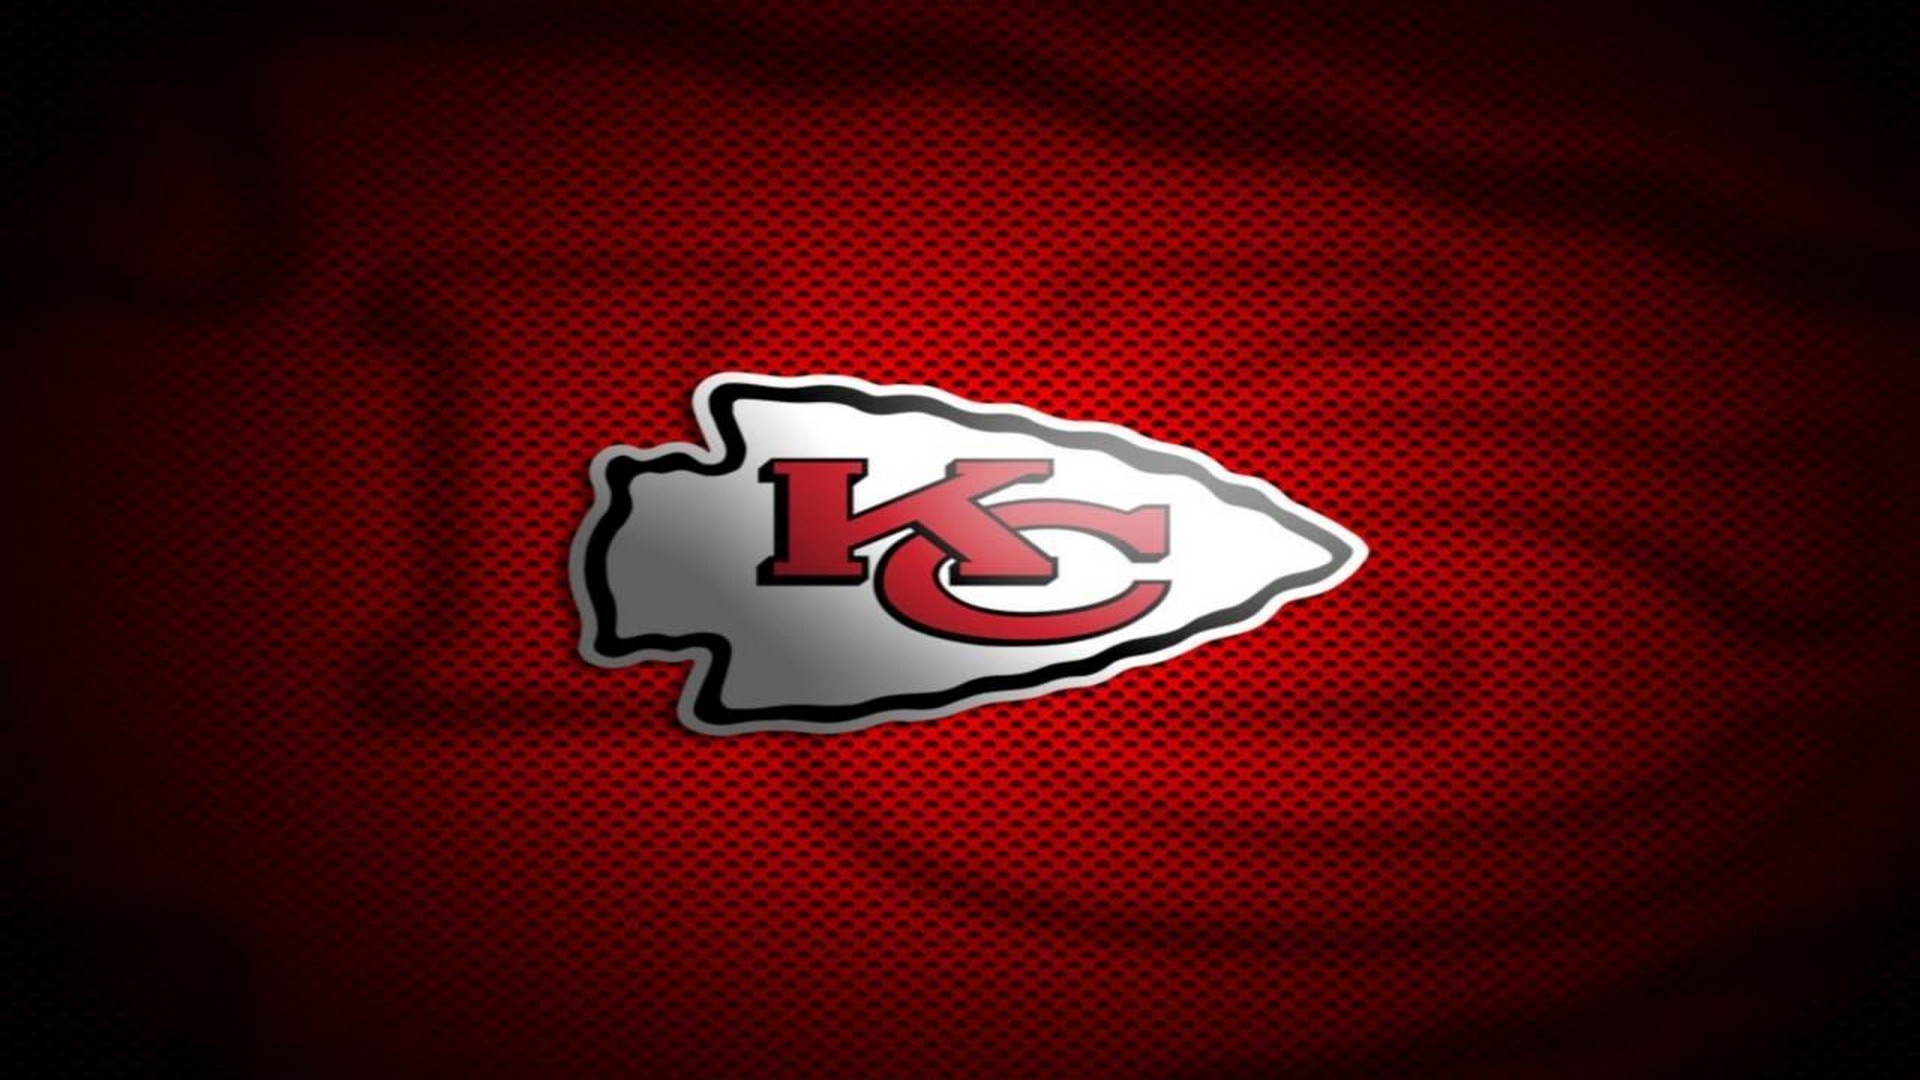 HD Kansas City Chiefs Backgrounds With Resolution 1920X1080 pixel. You can make this wallpaper for your Mac or Windows Desktop Background, iPhone, Android or Tablet and another Smartphone device for free